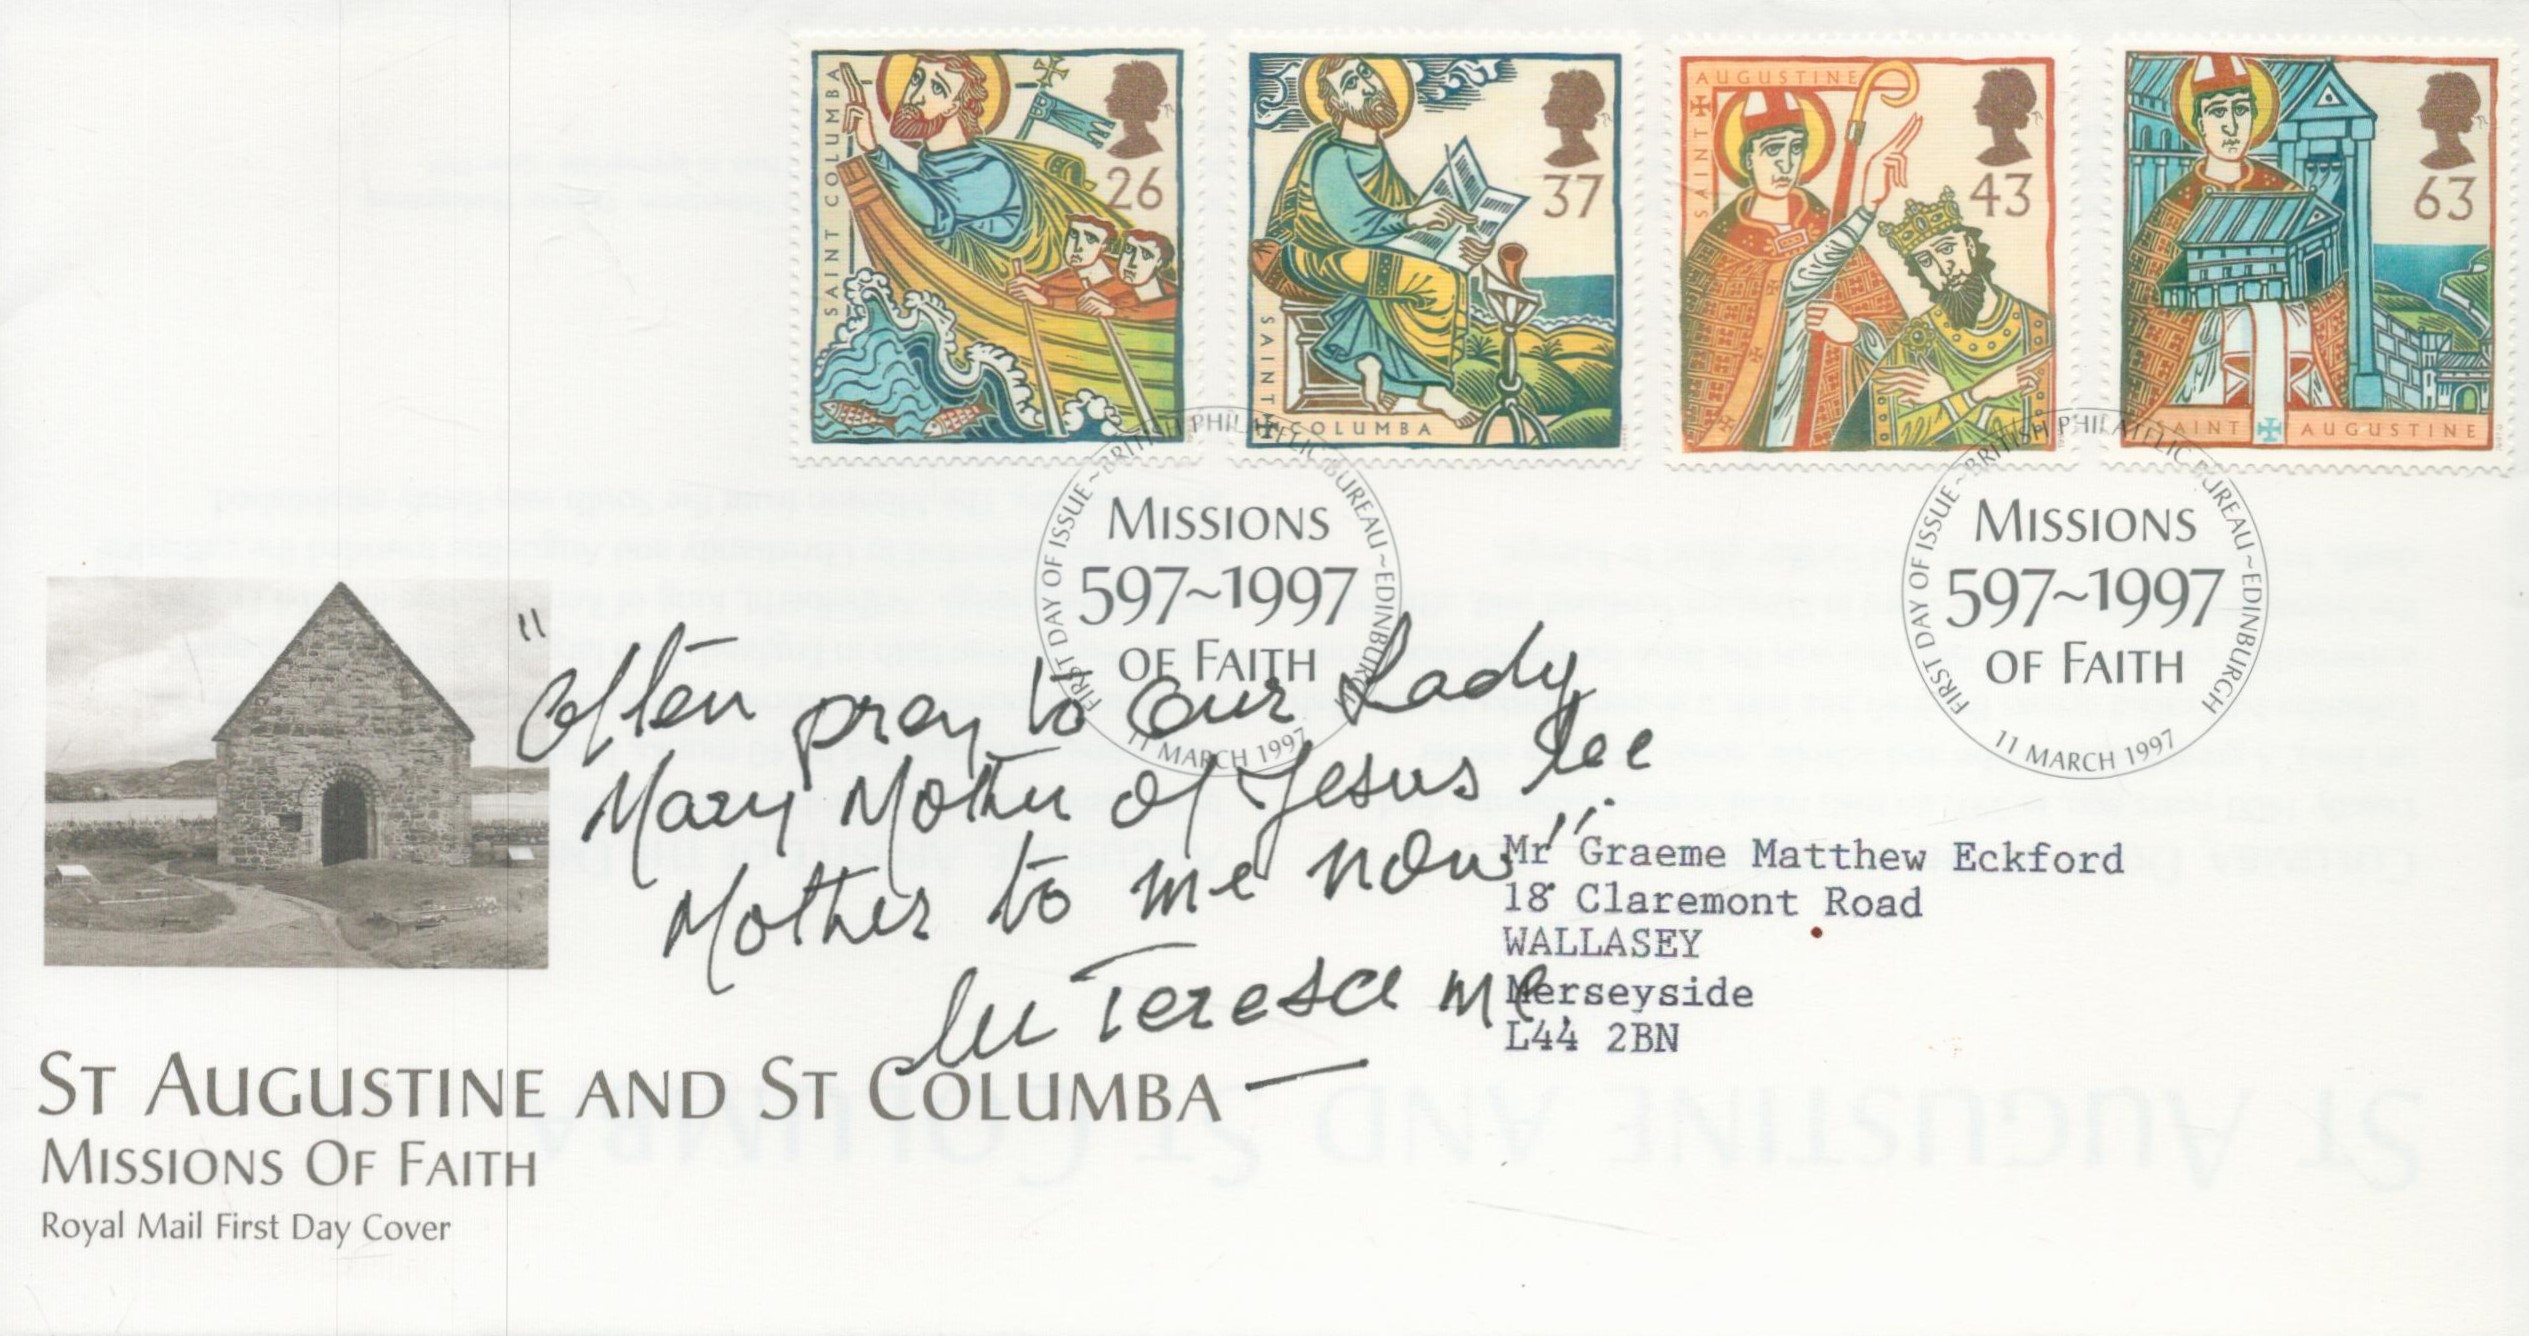 Mother Teresa signed St Augustine and St Columba FDC with inscribed message. 4 stamps and 2